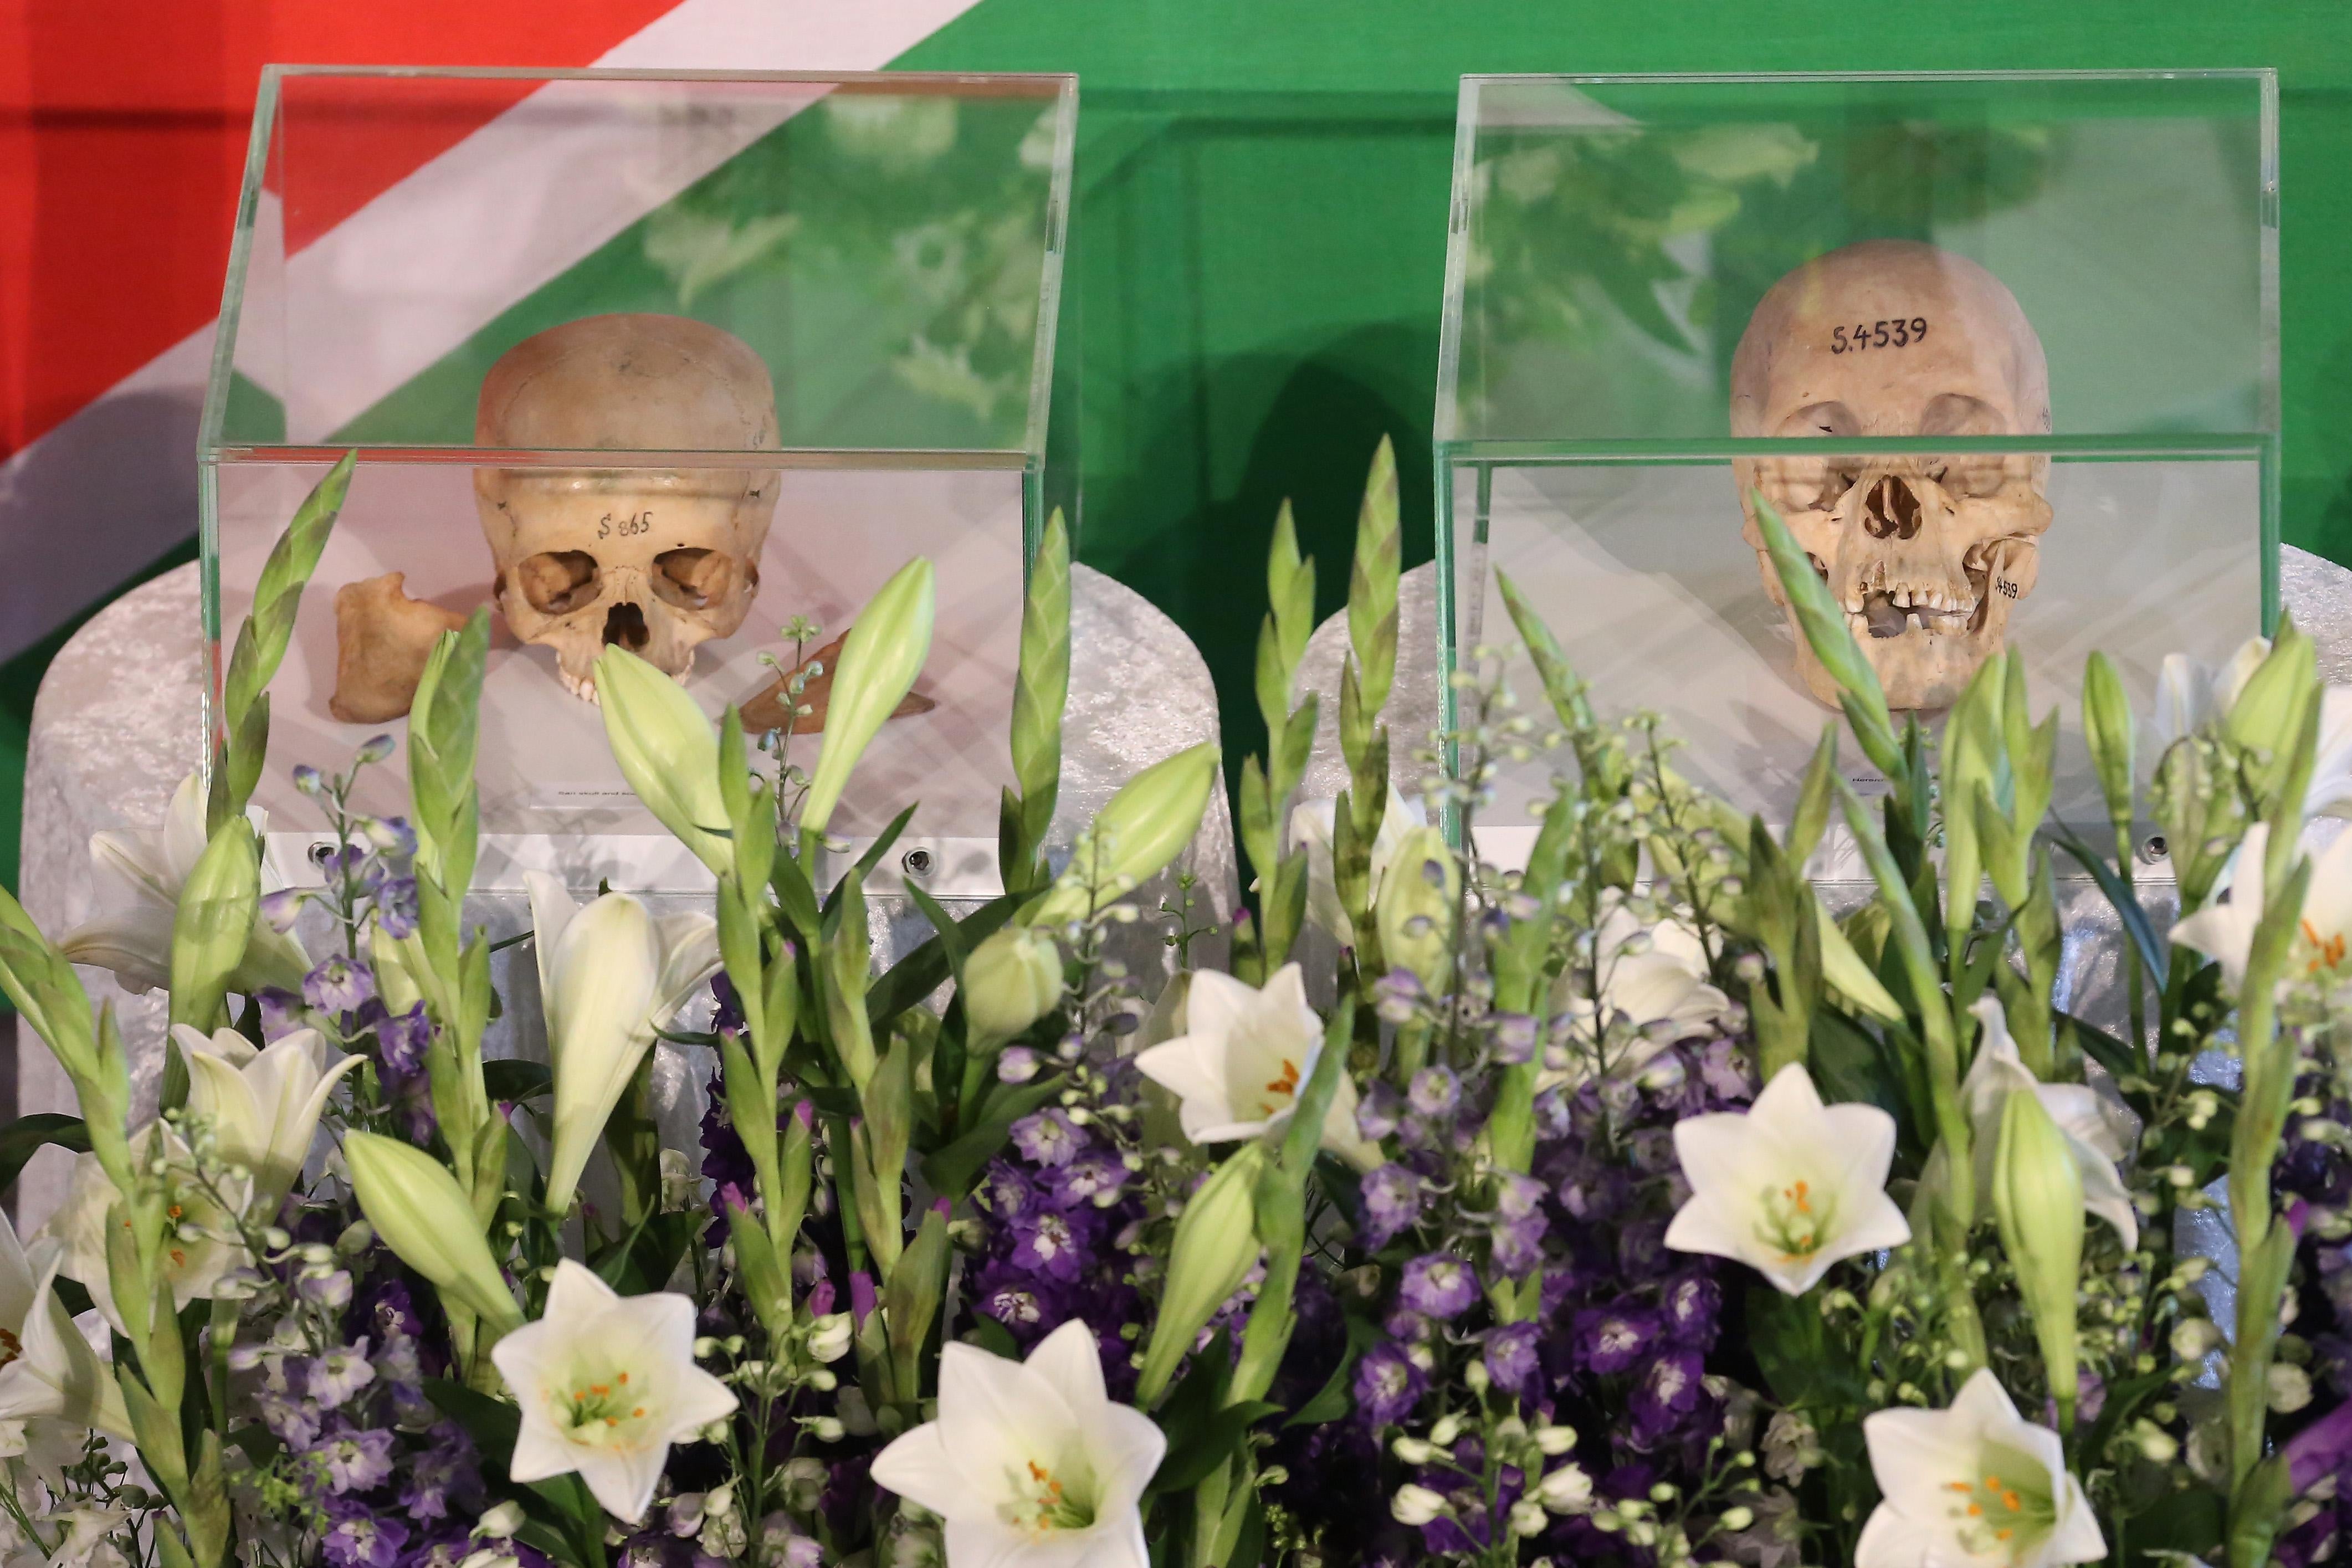 Two skulls in glass cases sit in front of a Namibian flag surrounded by flowers.